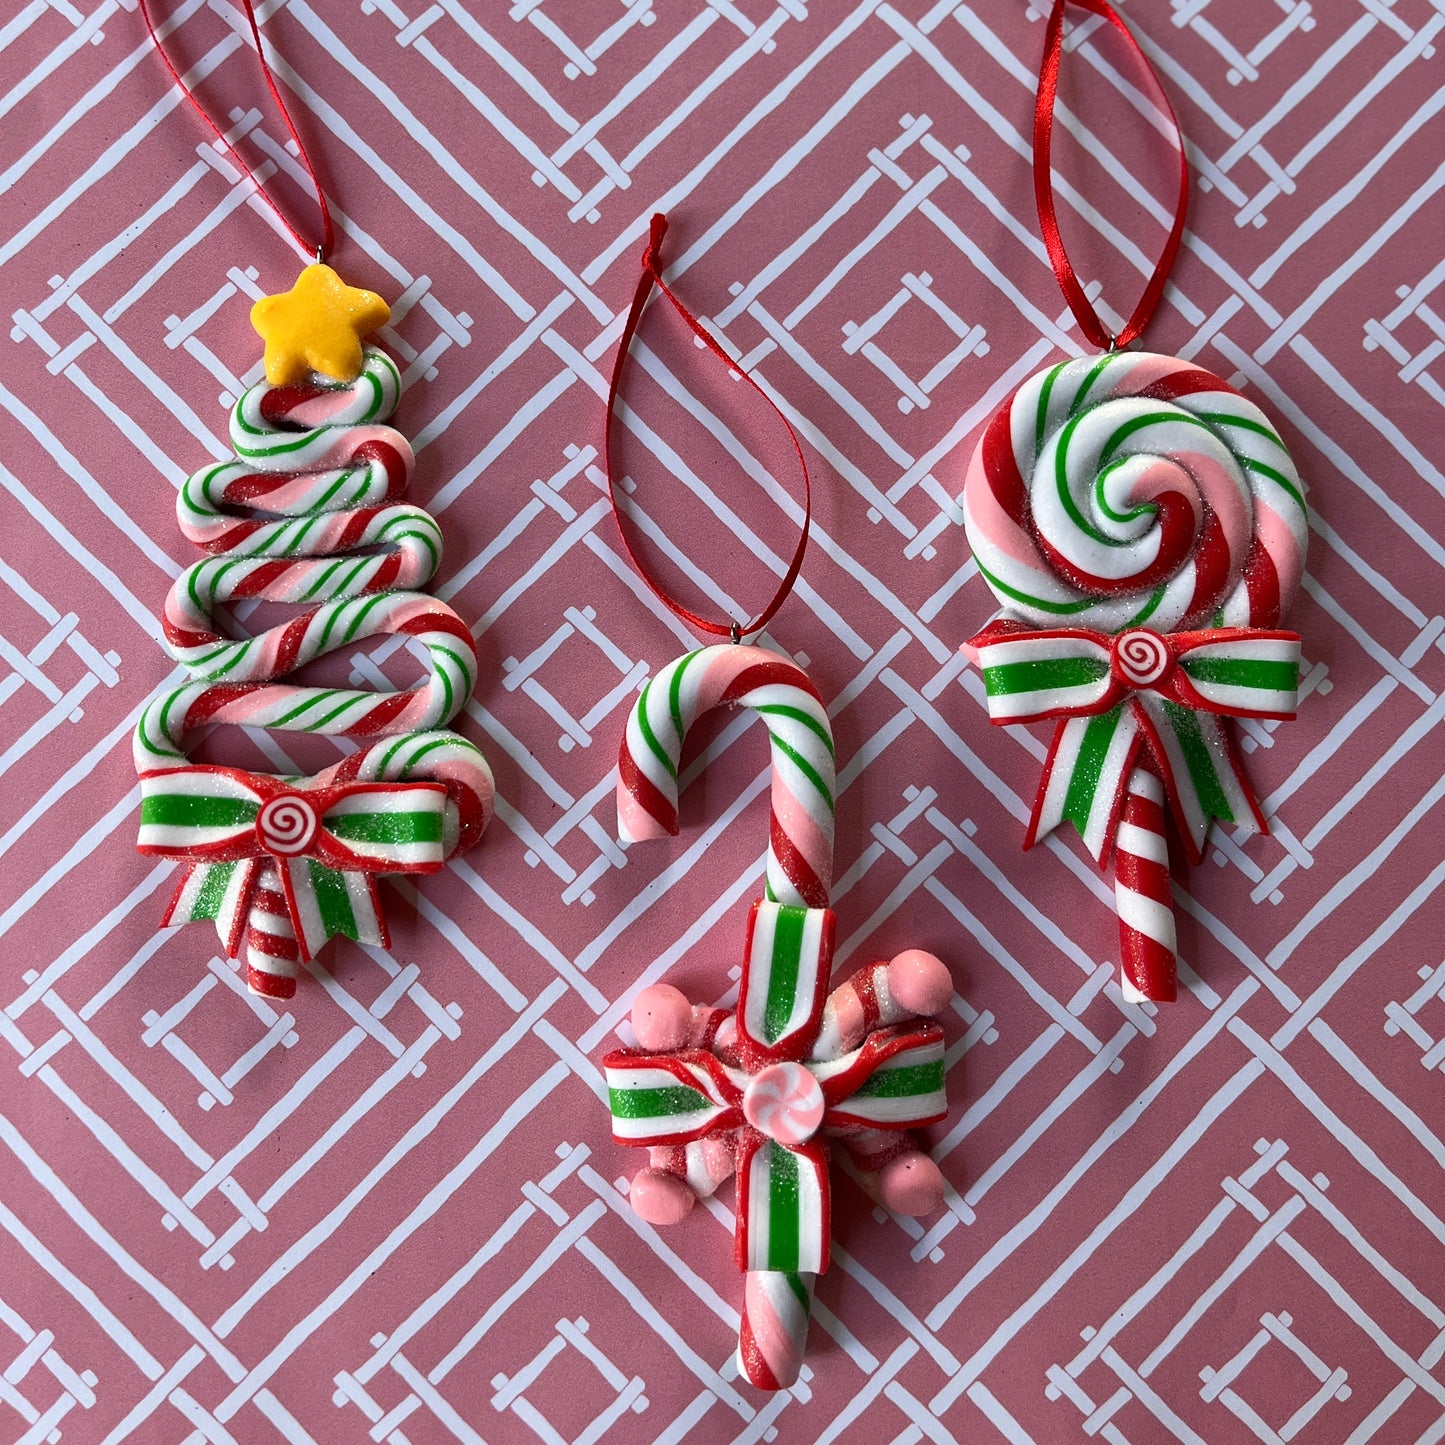 Green Peppermint Candy Ornaments, Set of 3